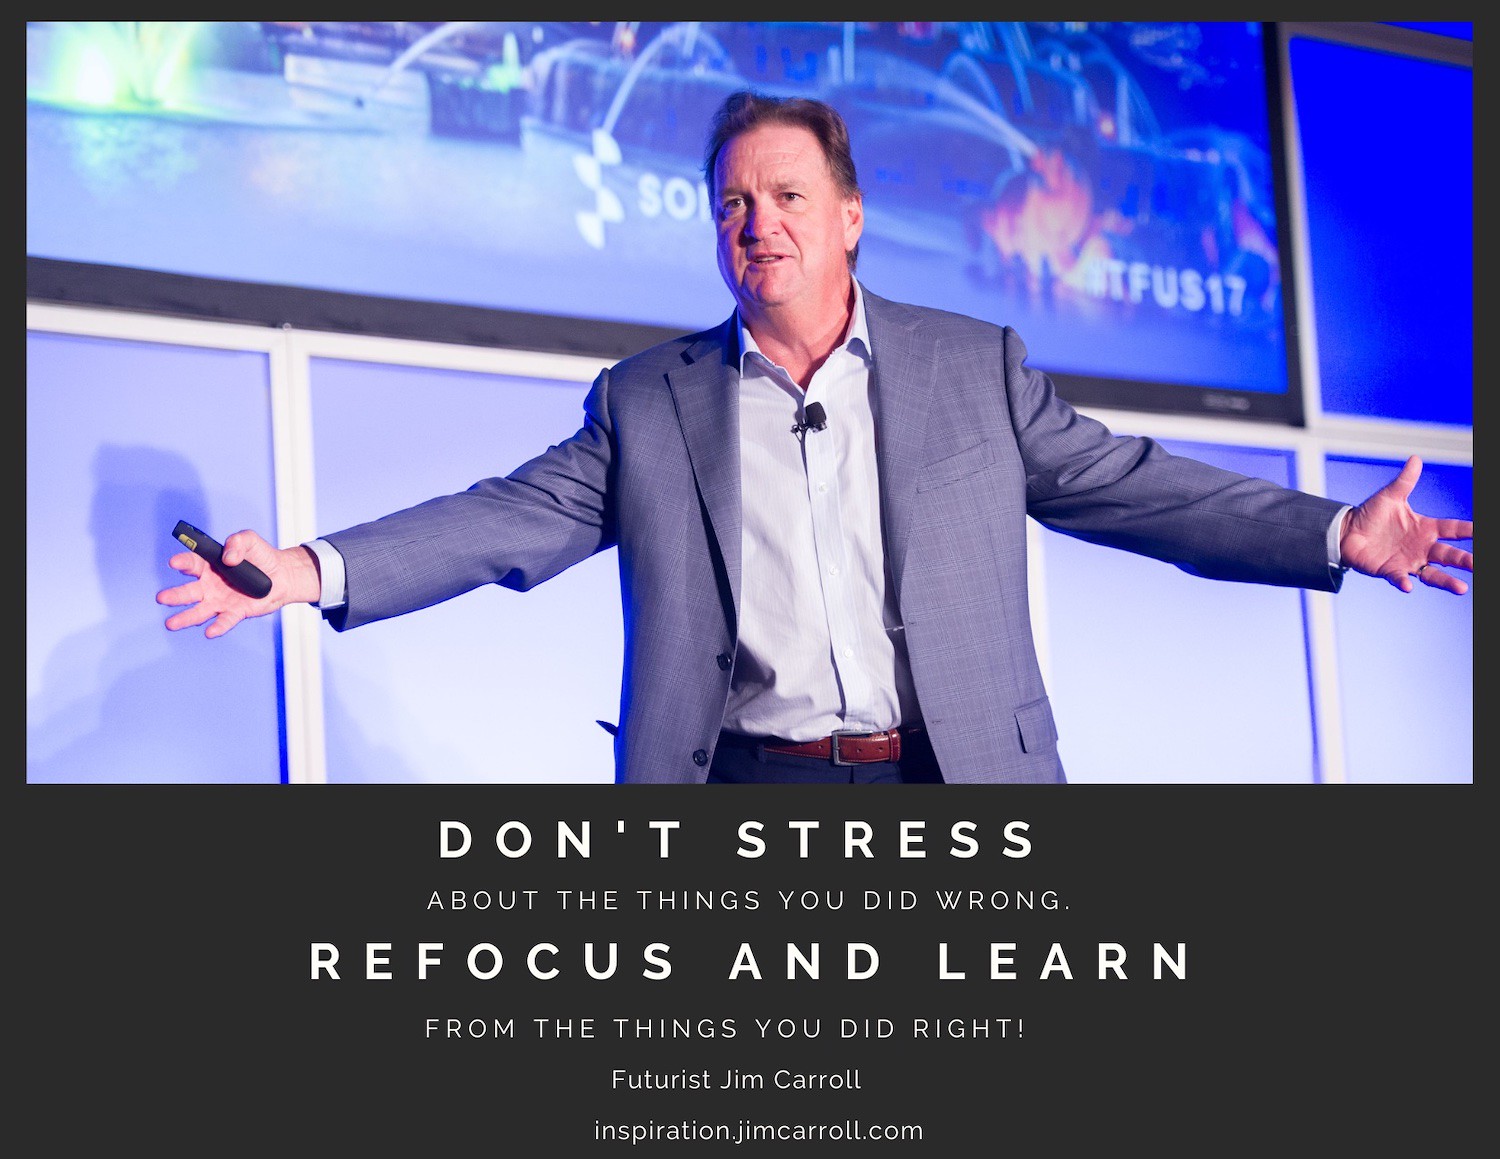 "Don't stress about the things you did wrong. Refocus and learn from the things you did right!" - Futurist Jim Carroll